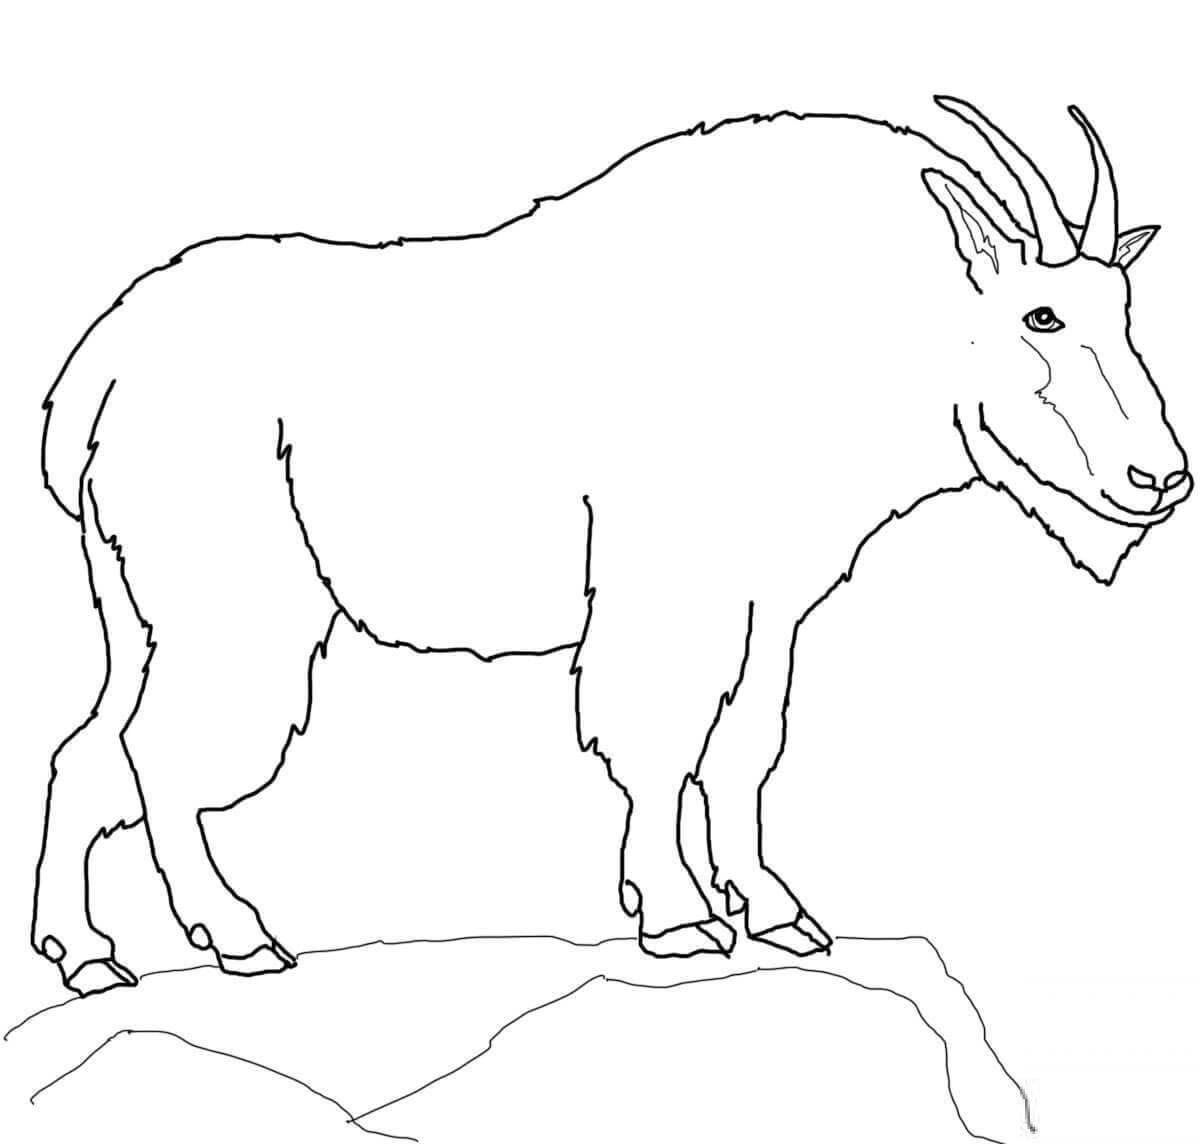 Coloring book exquisite mountain goat